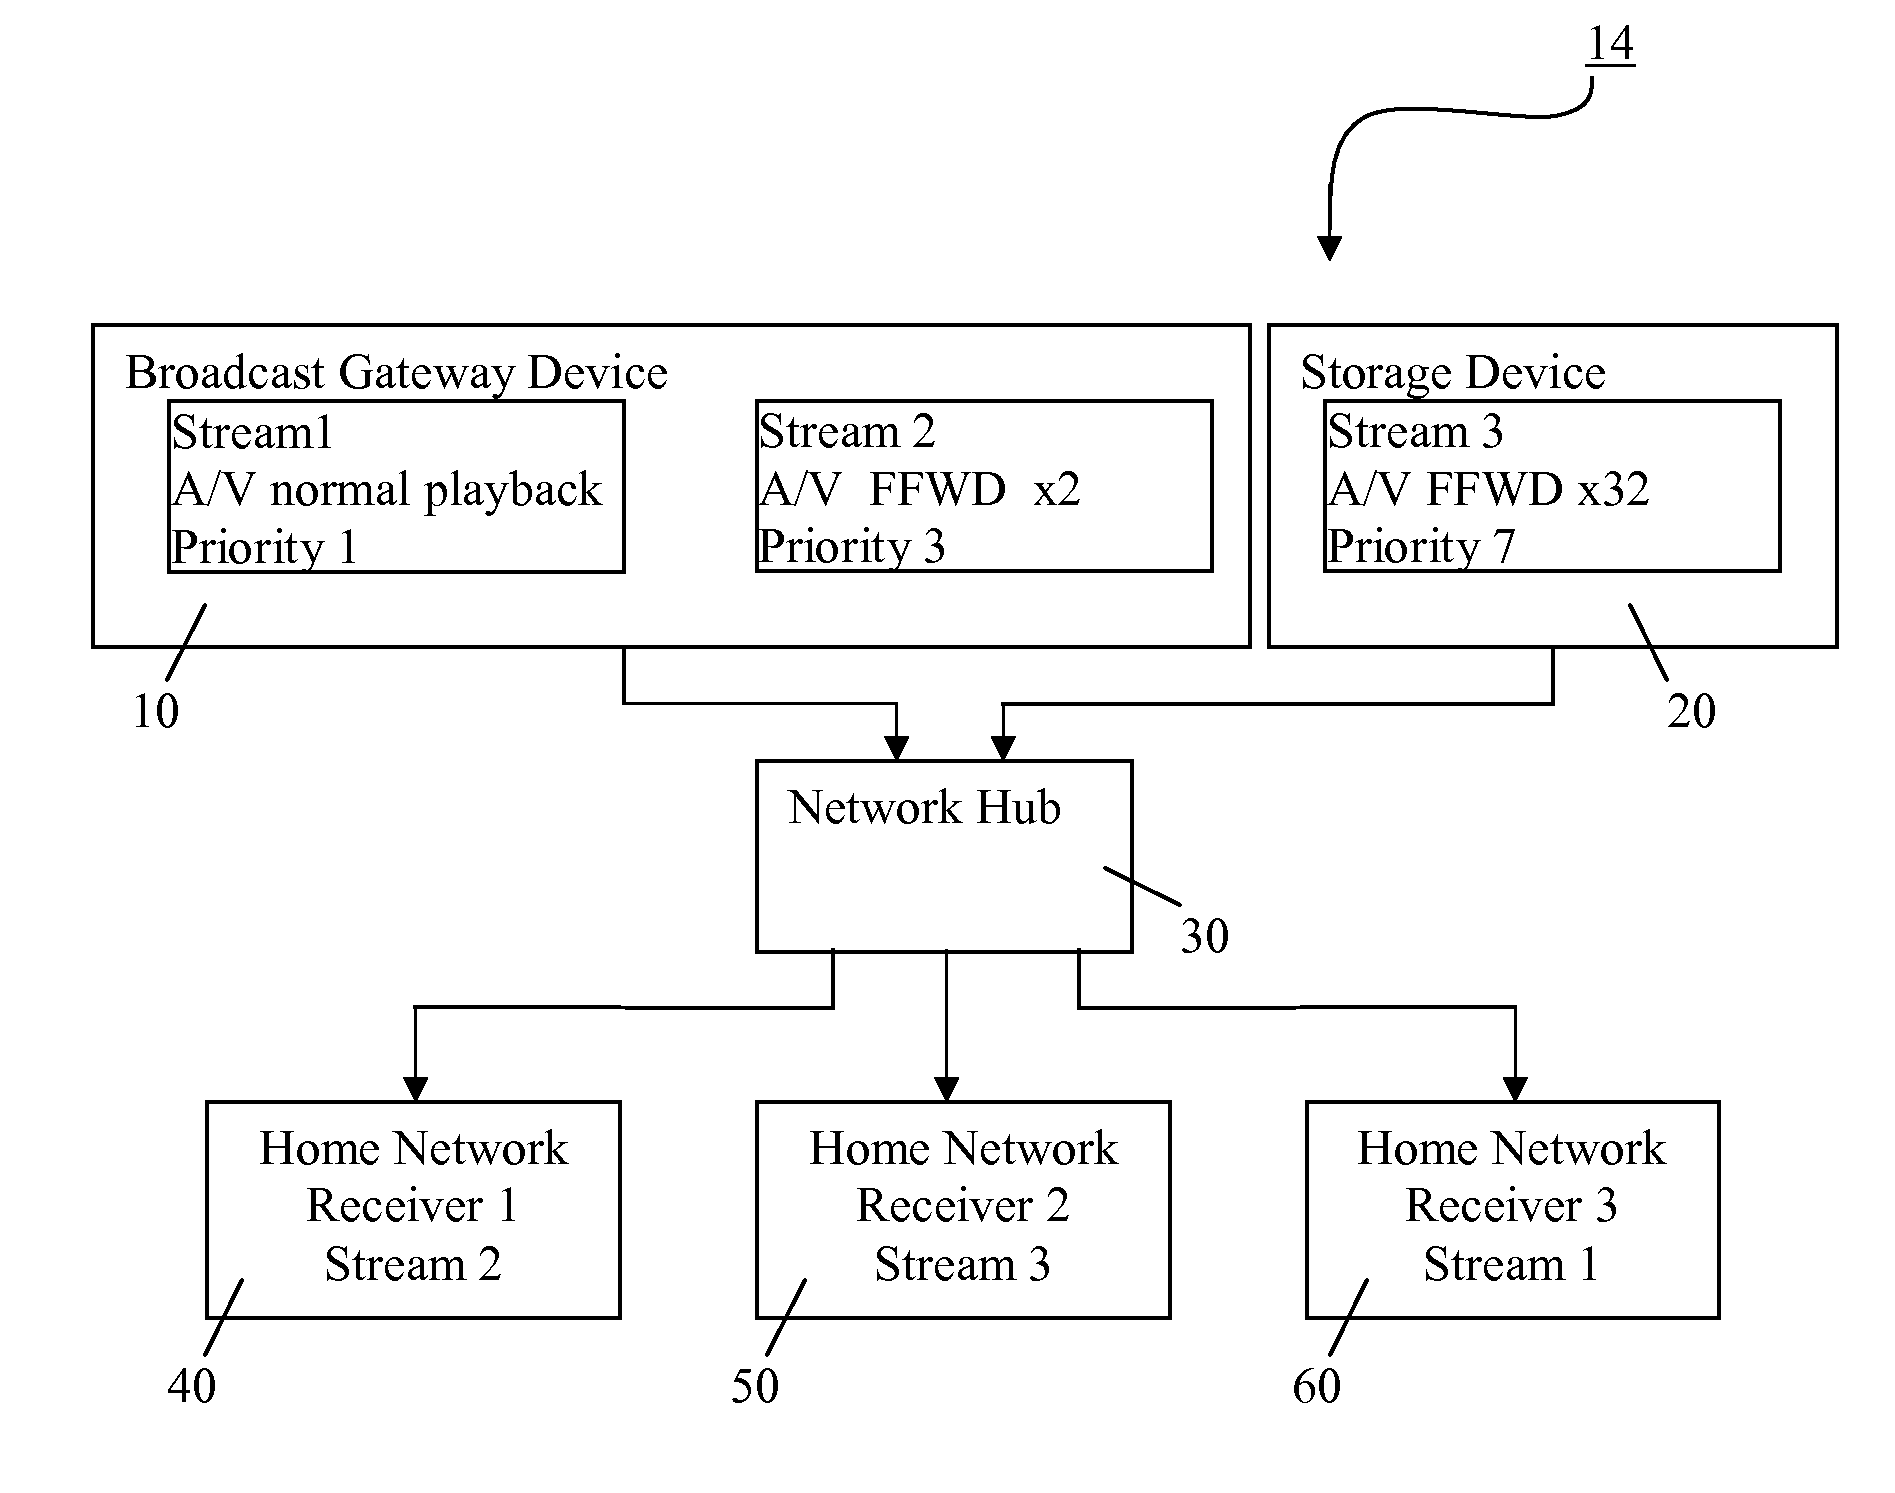 DYNAMIC QoS IN A NETWORK DISTRIBUTING STREAMED CONTENT